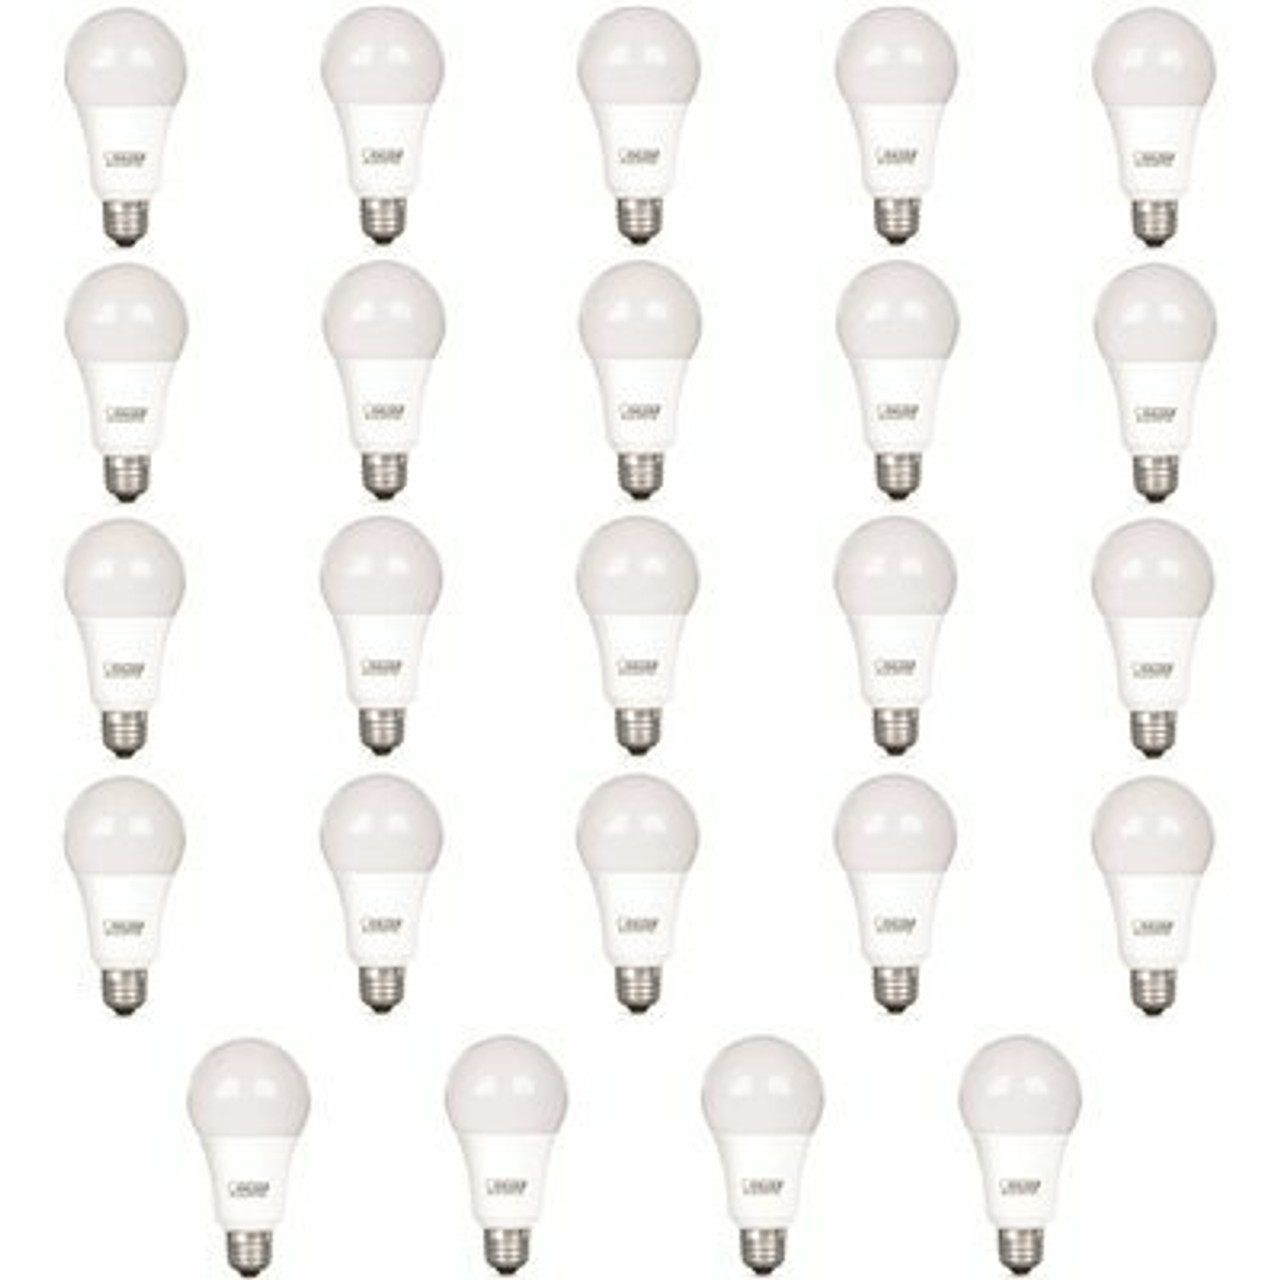 Feit Electric 100-Watt Equivalent A19 Dimmable Cec Energy Star 90+ Cri Indoor Led Light Bulb, Bright White(24-Pack)